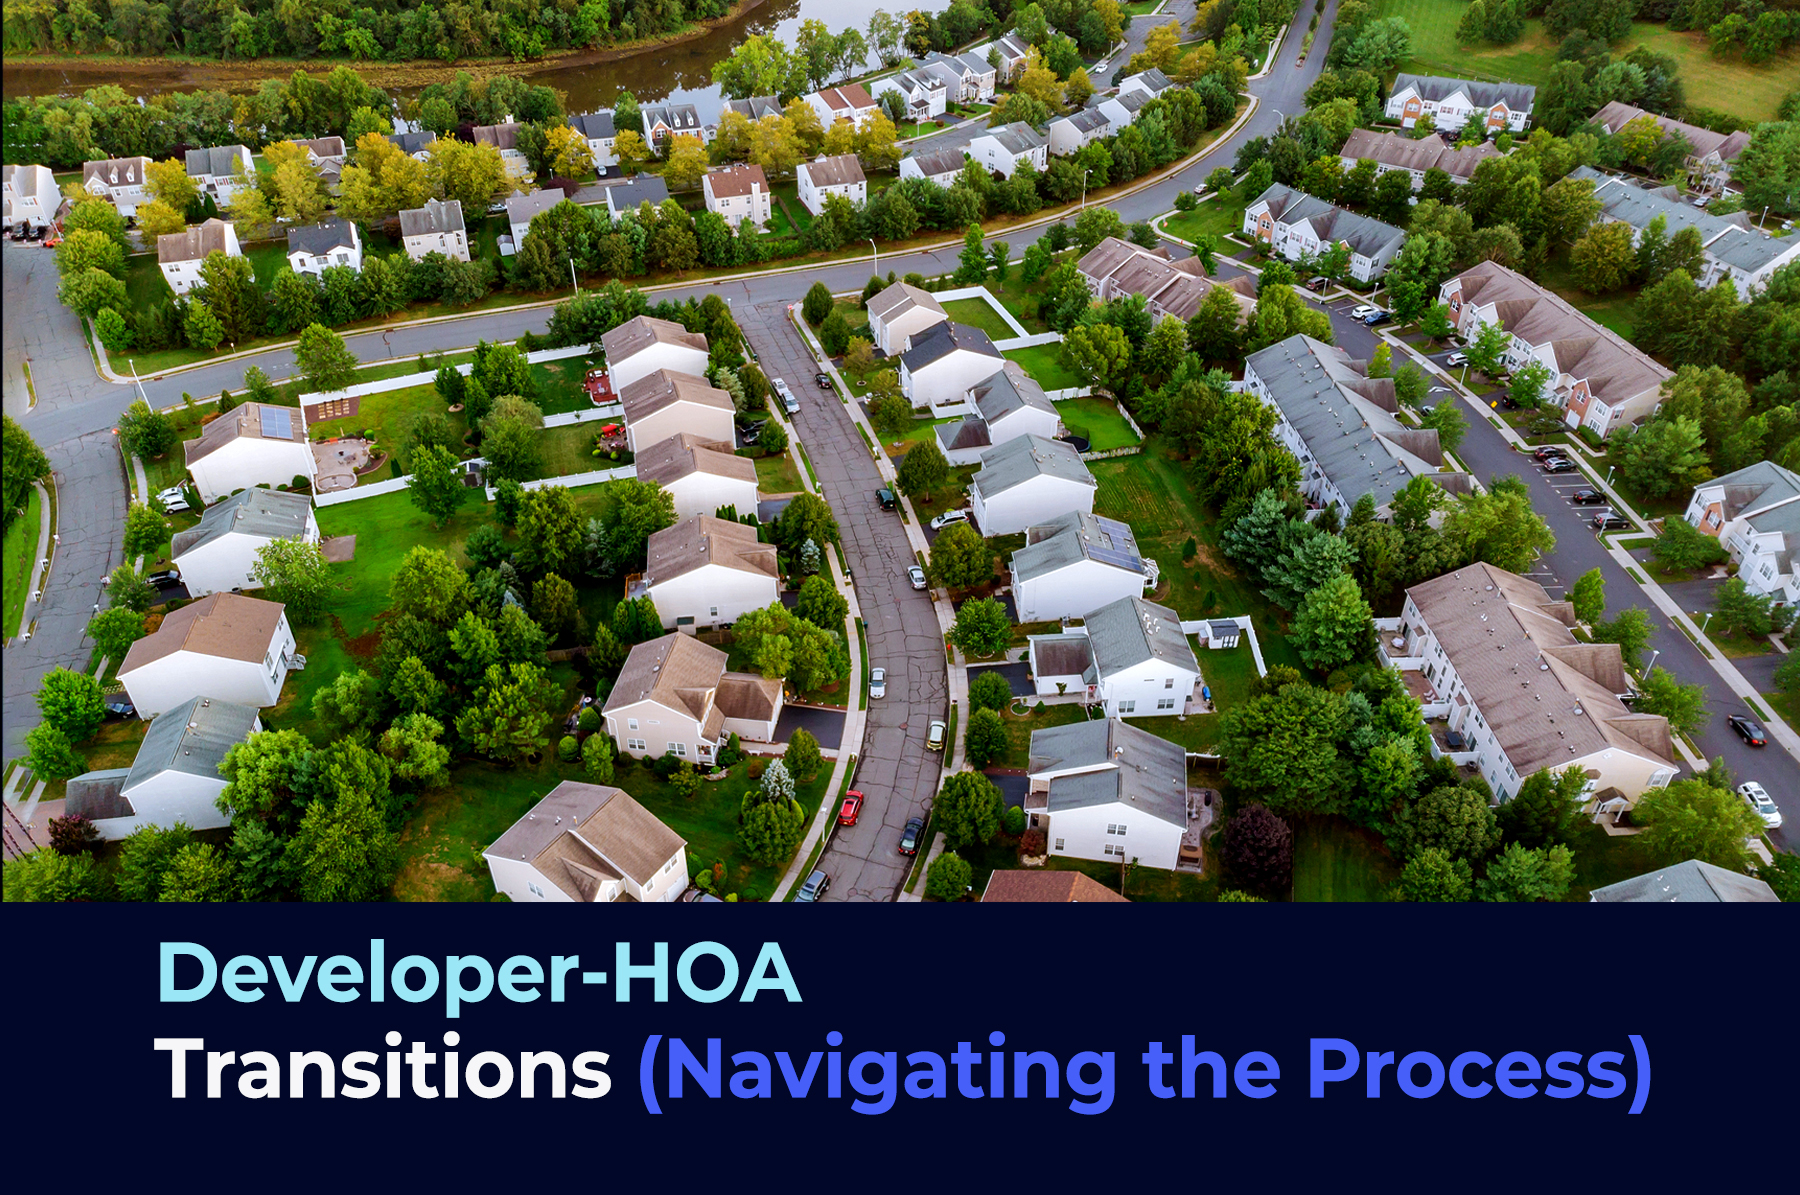 A condo association community houses, a drone view with a phrase "Developer-HOA Transitions (Navigating the Process)"